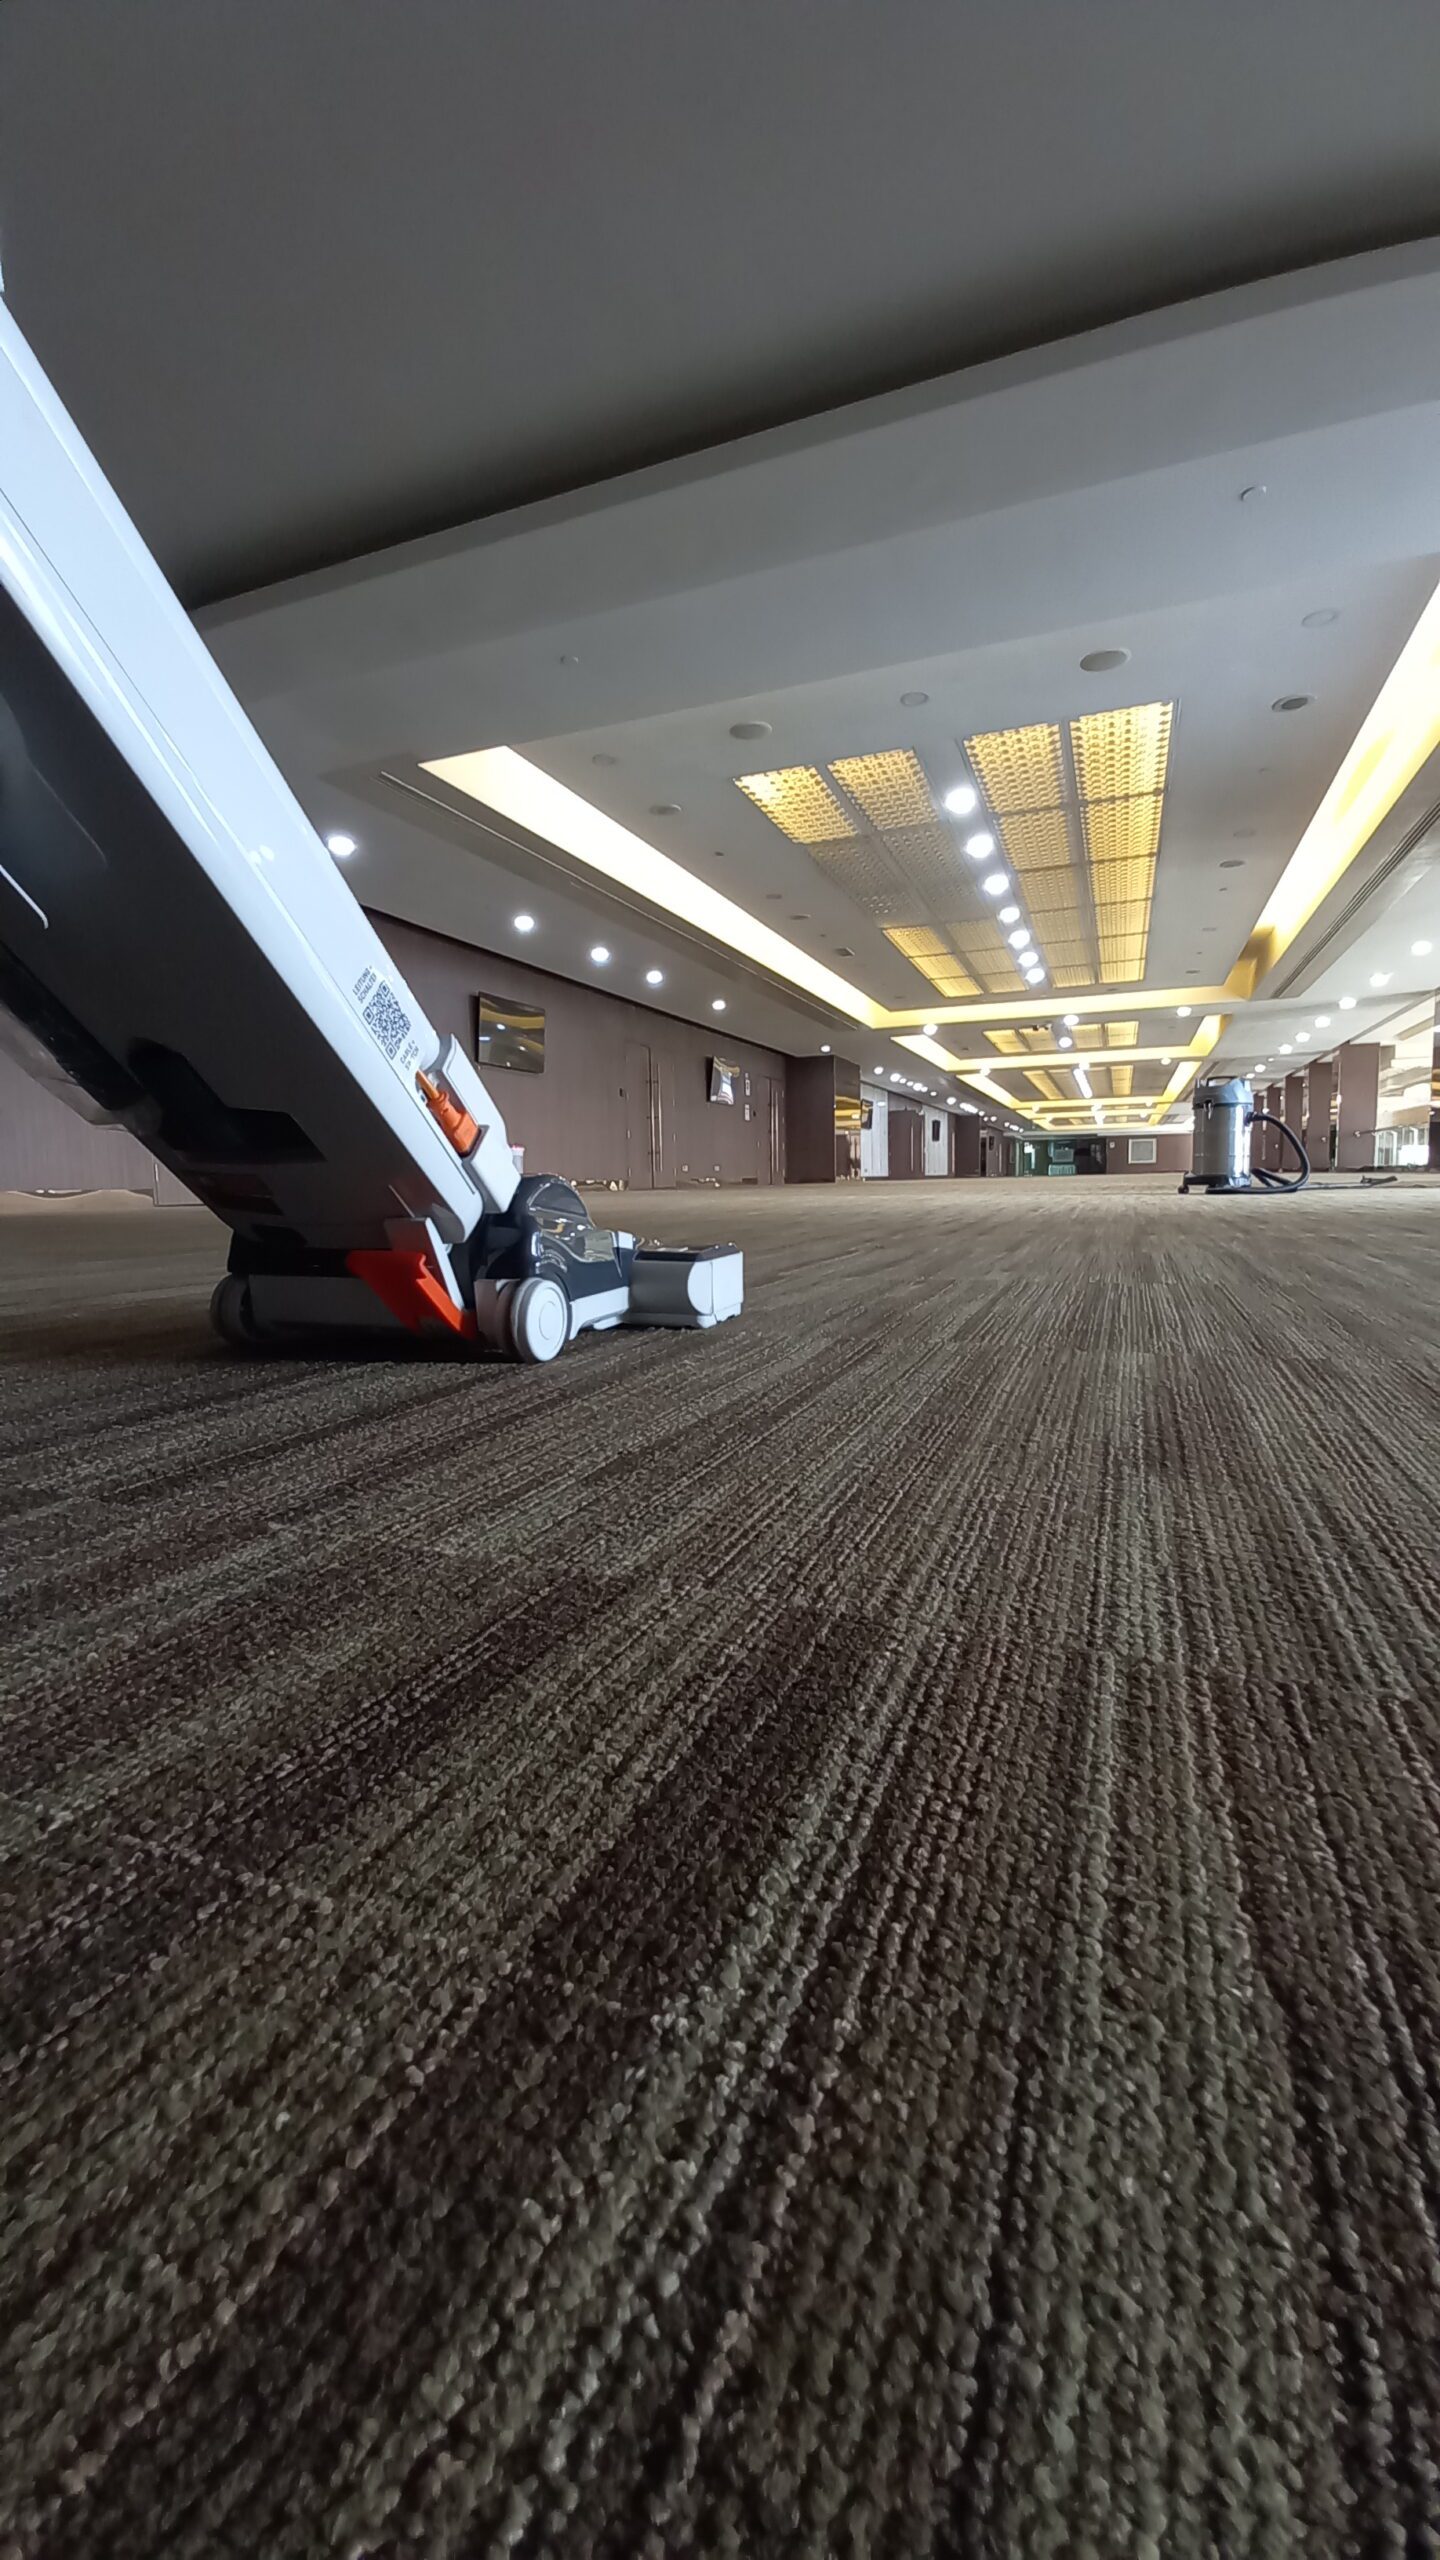 Duel-C Carpet cleaning in convention center